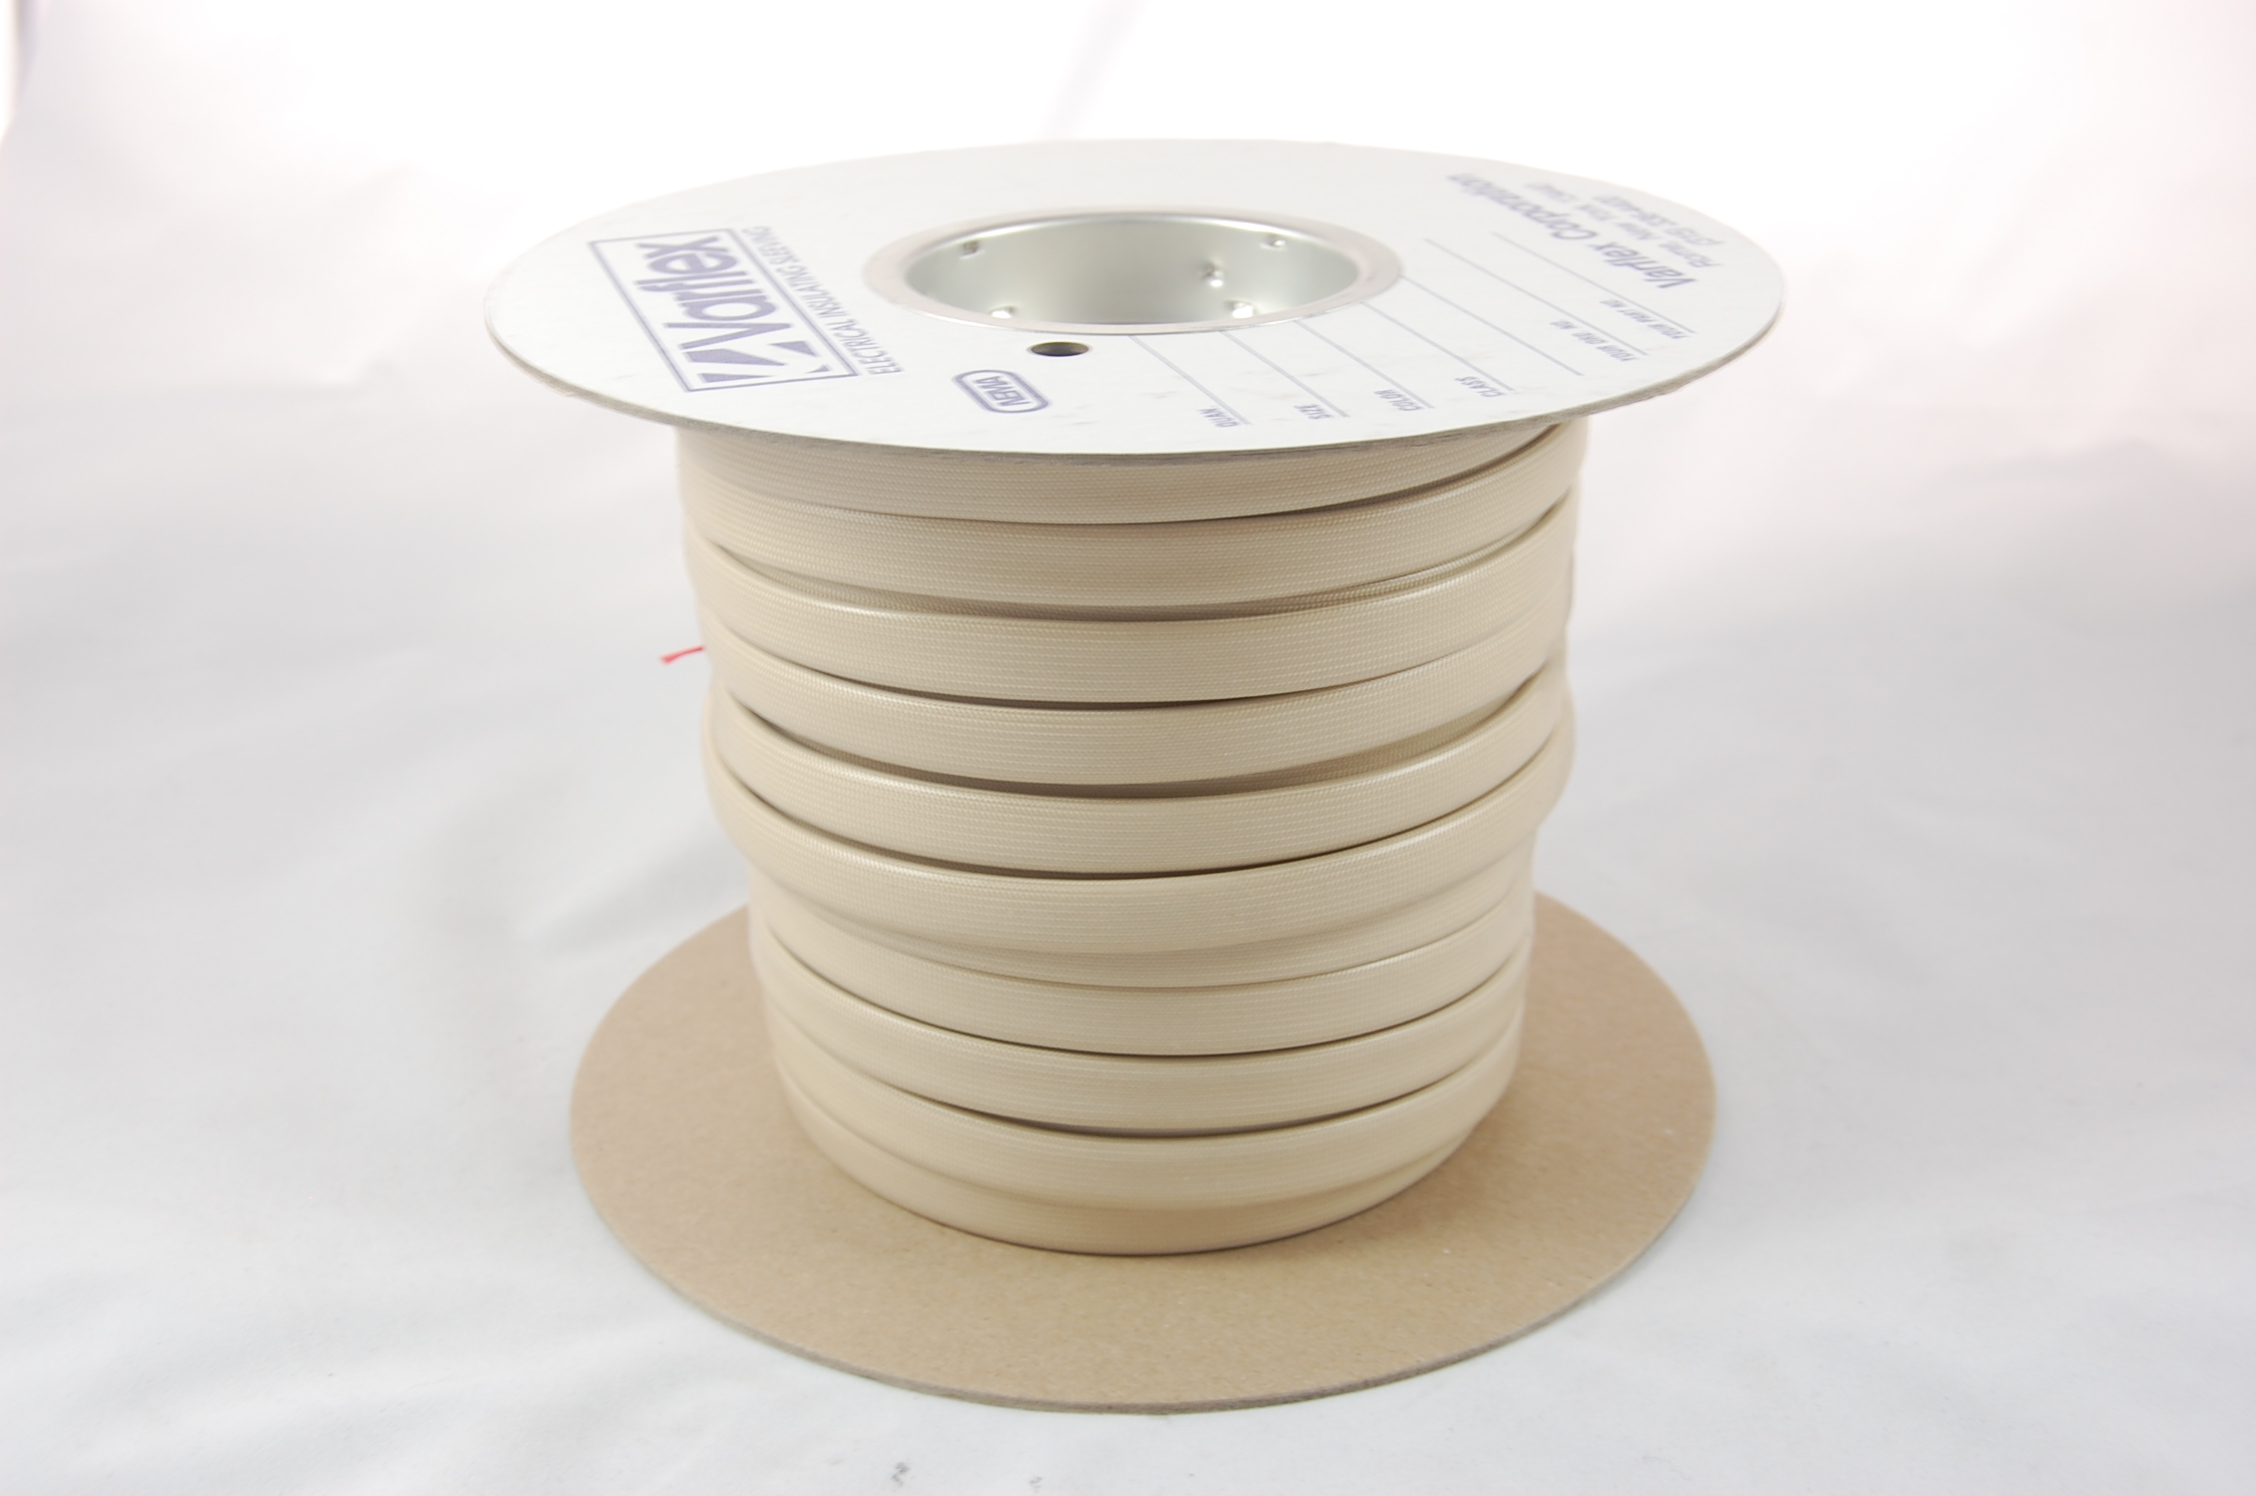 1" AWG Varglas Silicone Rubber Grade H-A-1 (8000V) High Temperature Silicone Rubber Coated Braided Fiberglass Sleeving 200°C, natural, 100 FT per spool